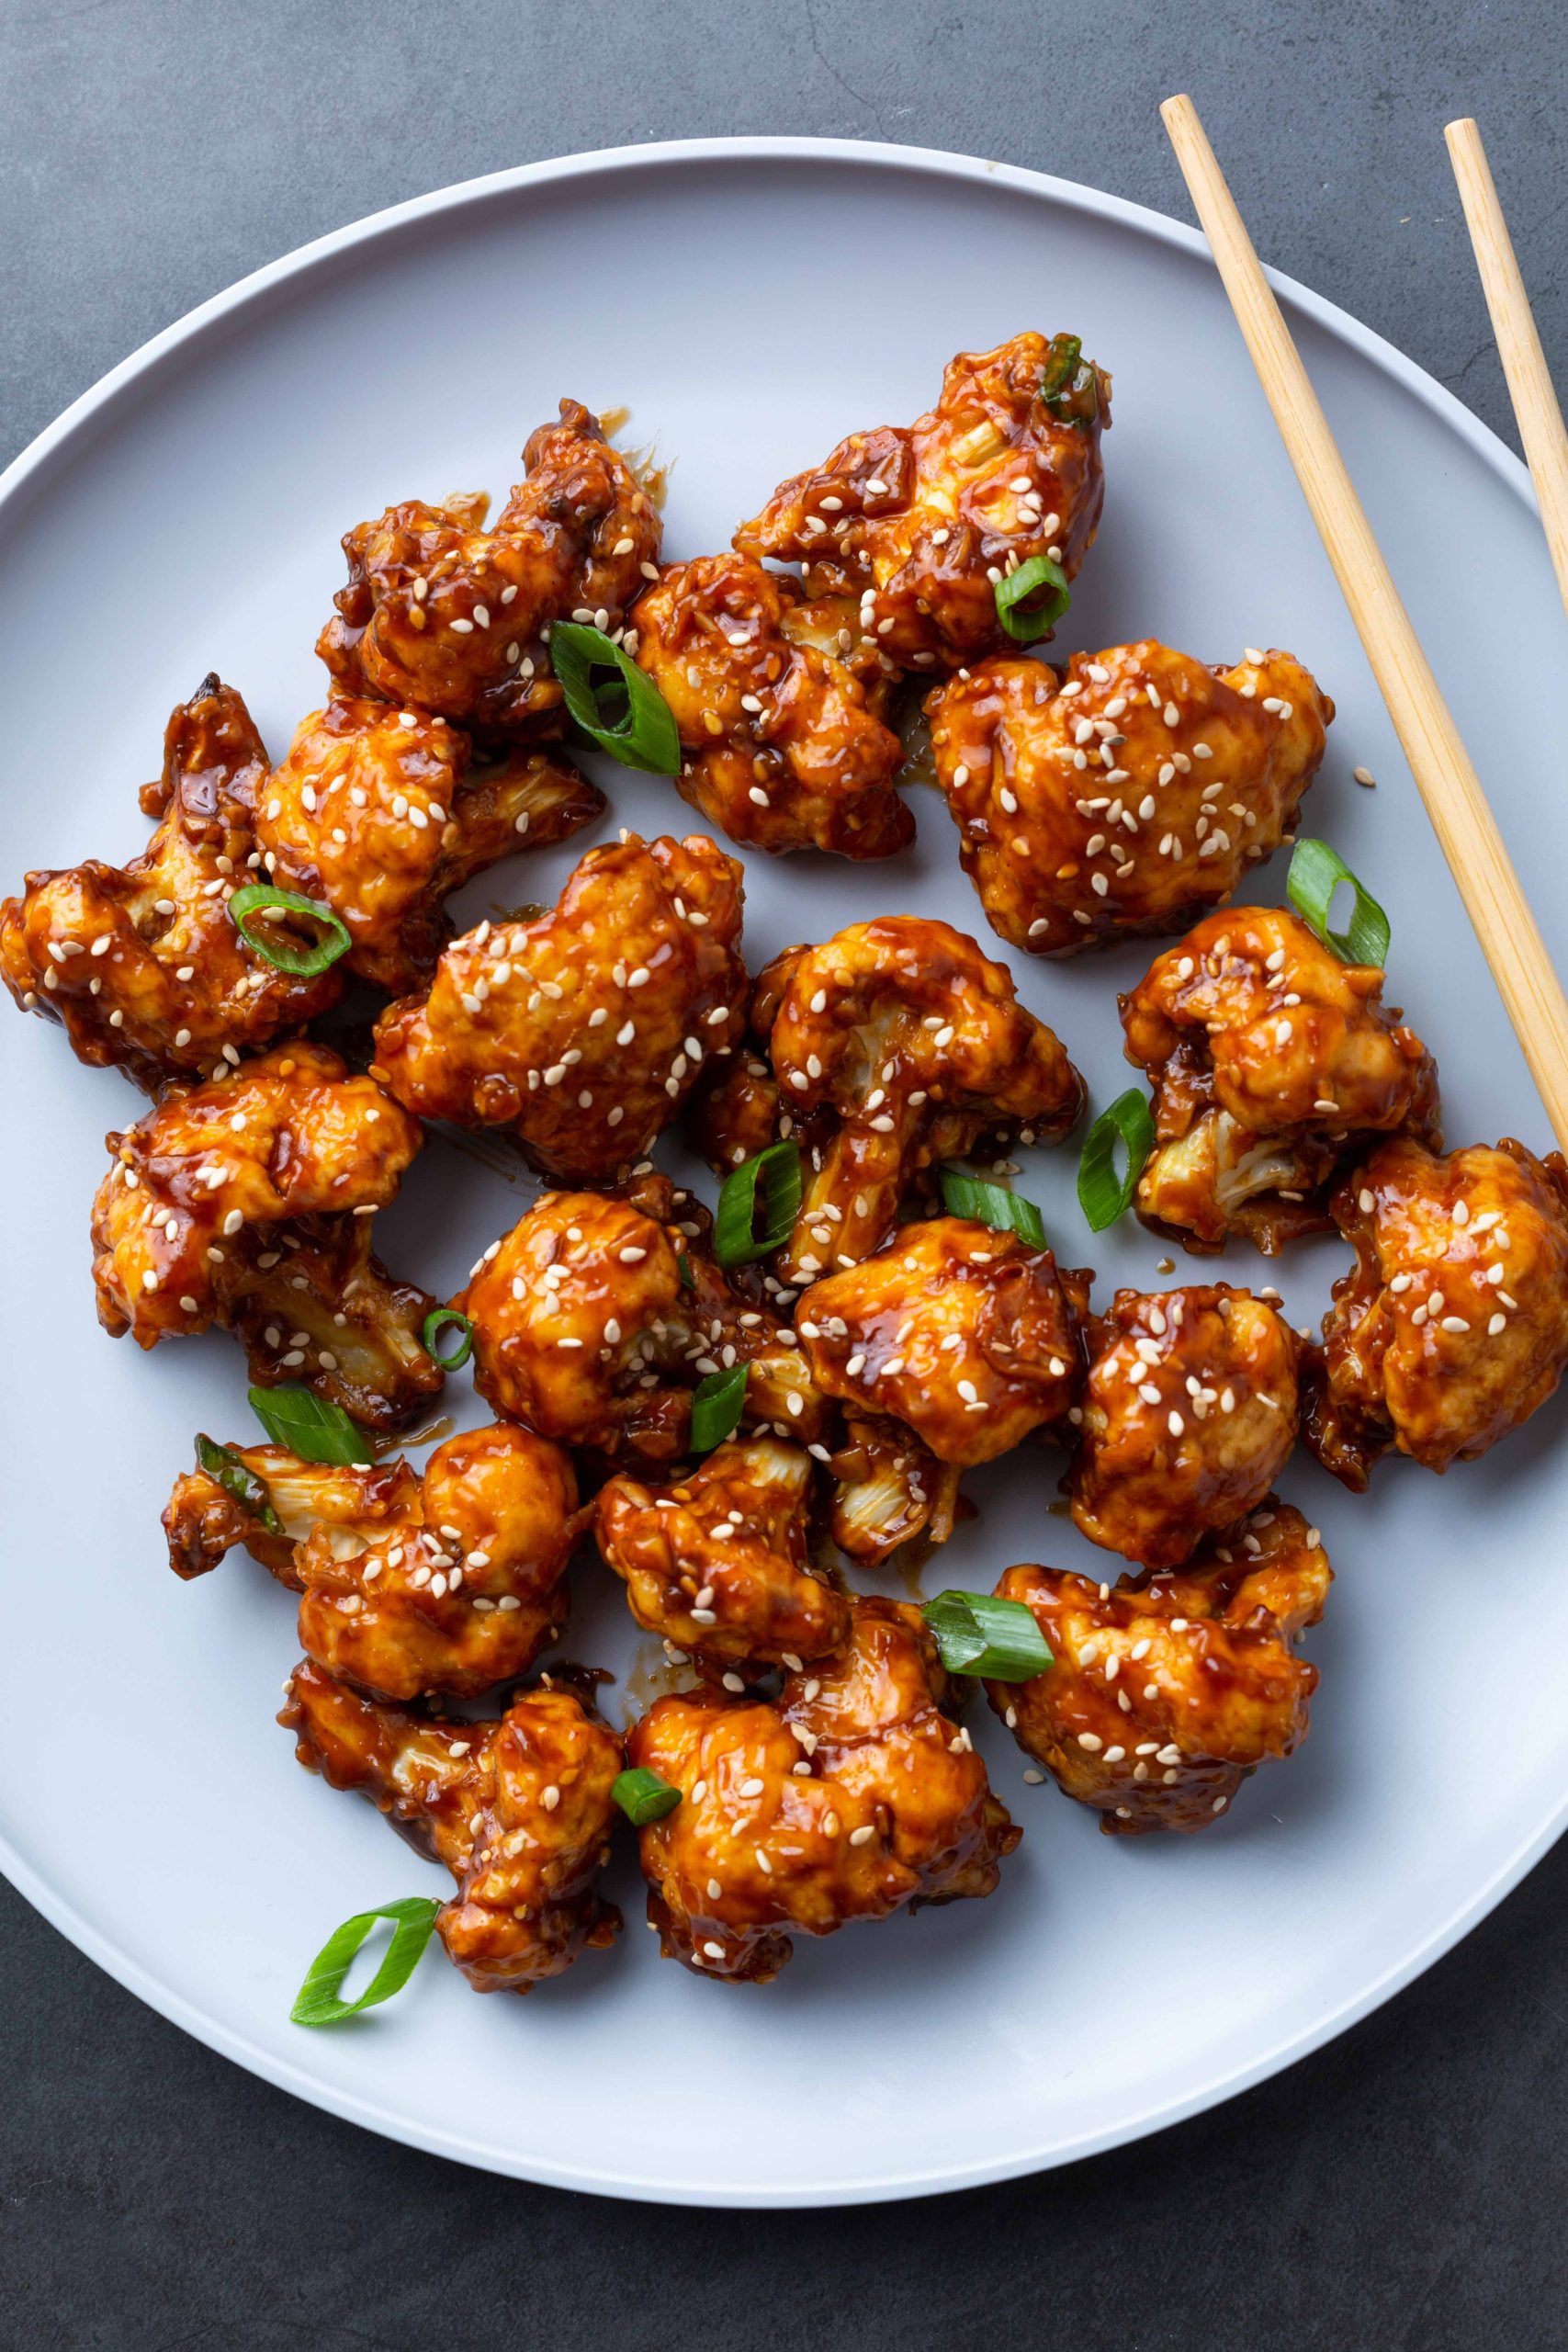 A plate of chicken wings garnished with sesame seeds and served with chopsticks